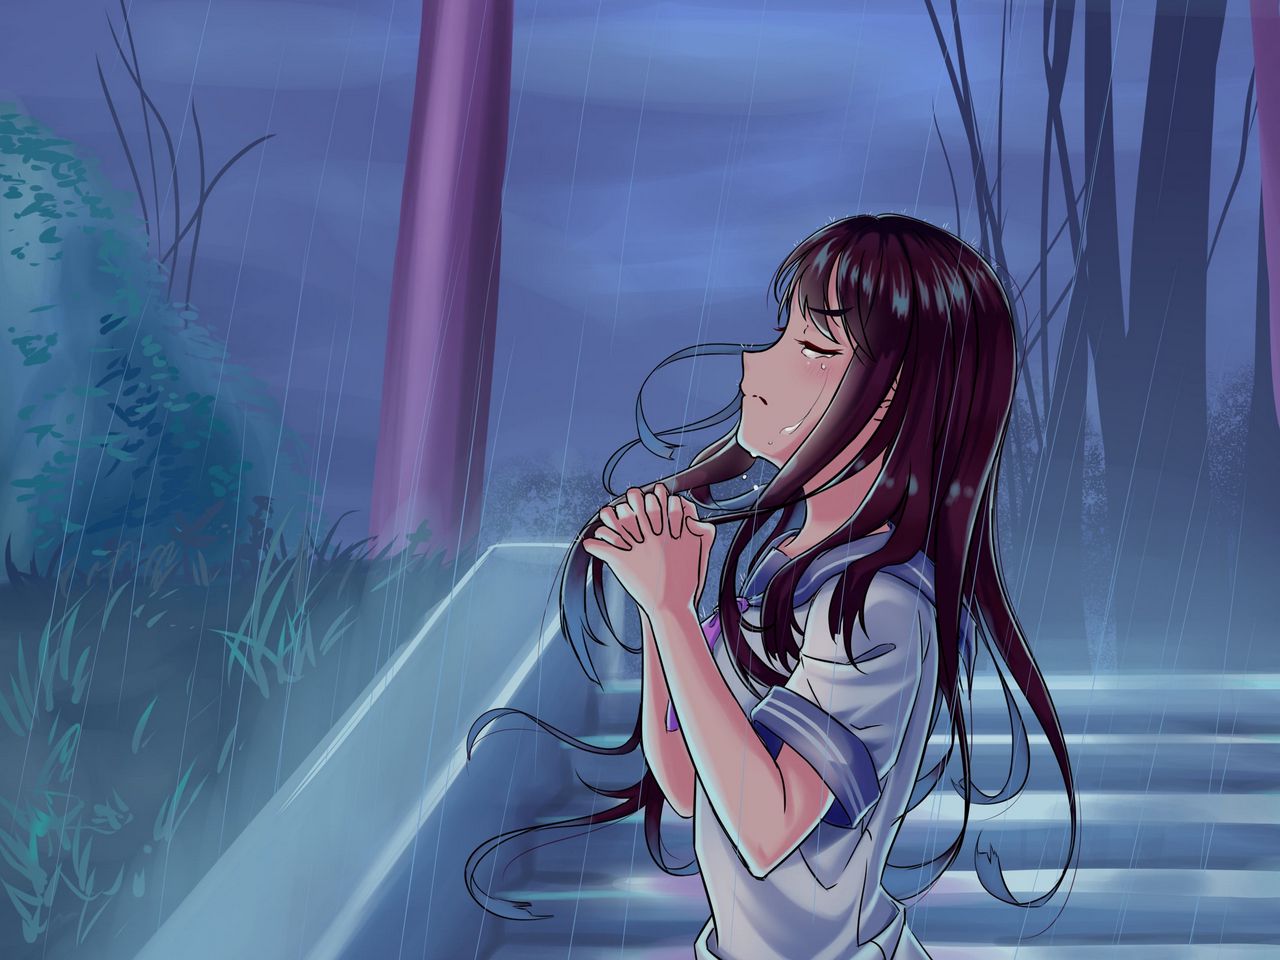 Live wallpaper Lonely anime girl, stream DOWNLOAD